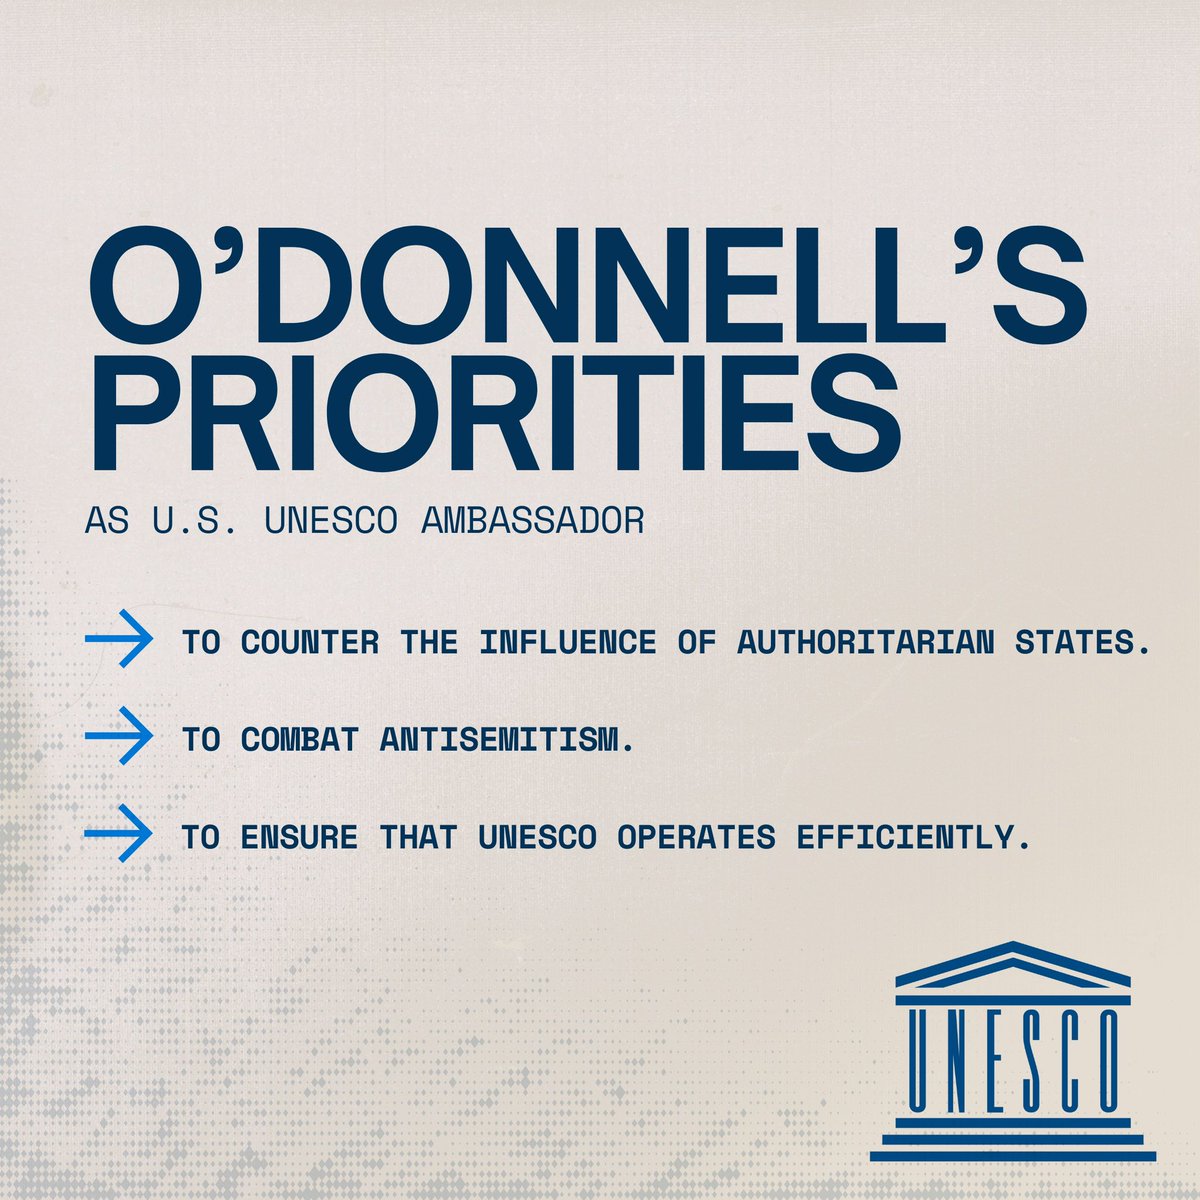 The Senate has voted so it’s almost official: Thank you, @SenSchumer and congratulations to Ambassador-designate Courtney O’Donnell, soon to be representing the U.S. @UNESCO!   Get to know her and her priorities once sworn-in.